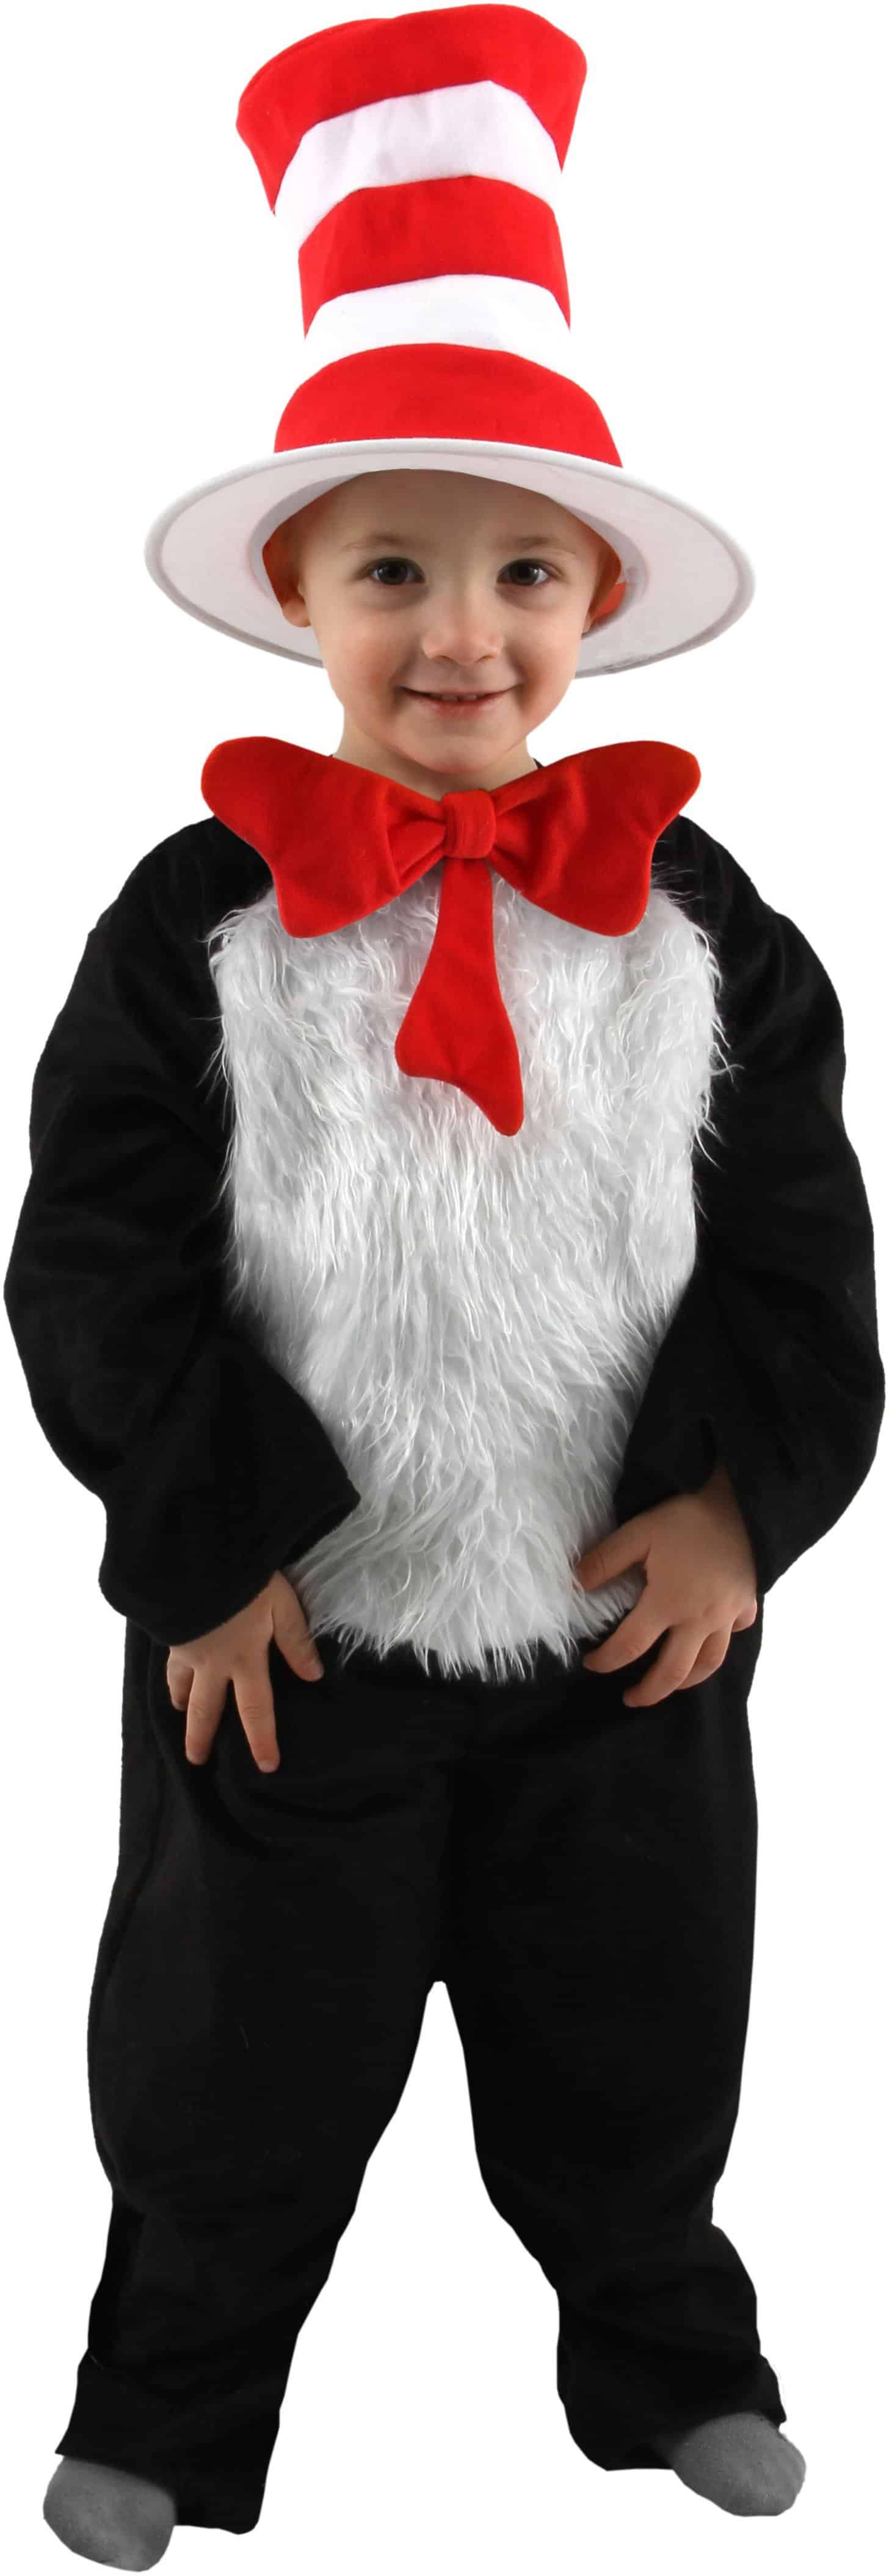 Dr. Seuss The Cat in the Hat - The Cat in the Hat Toddler / Child Costume